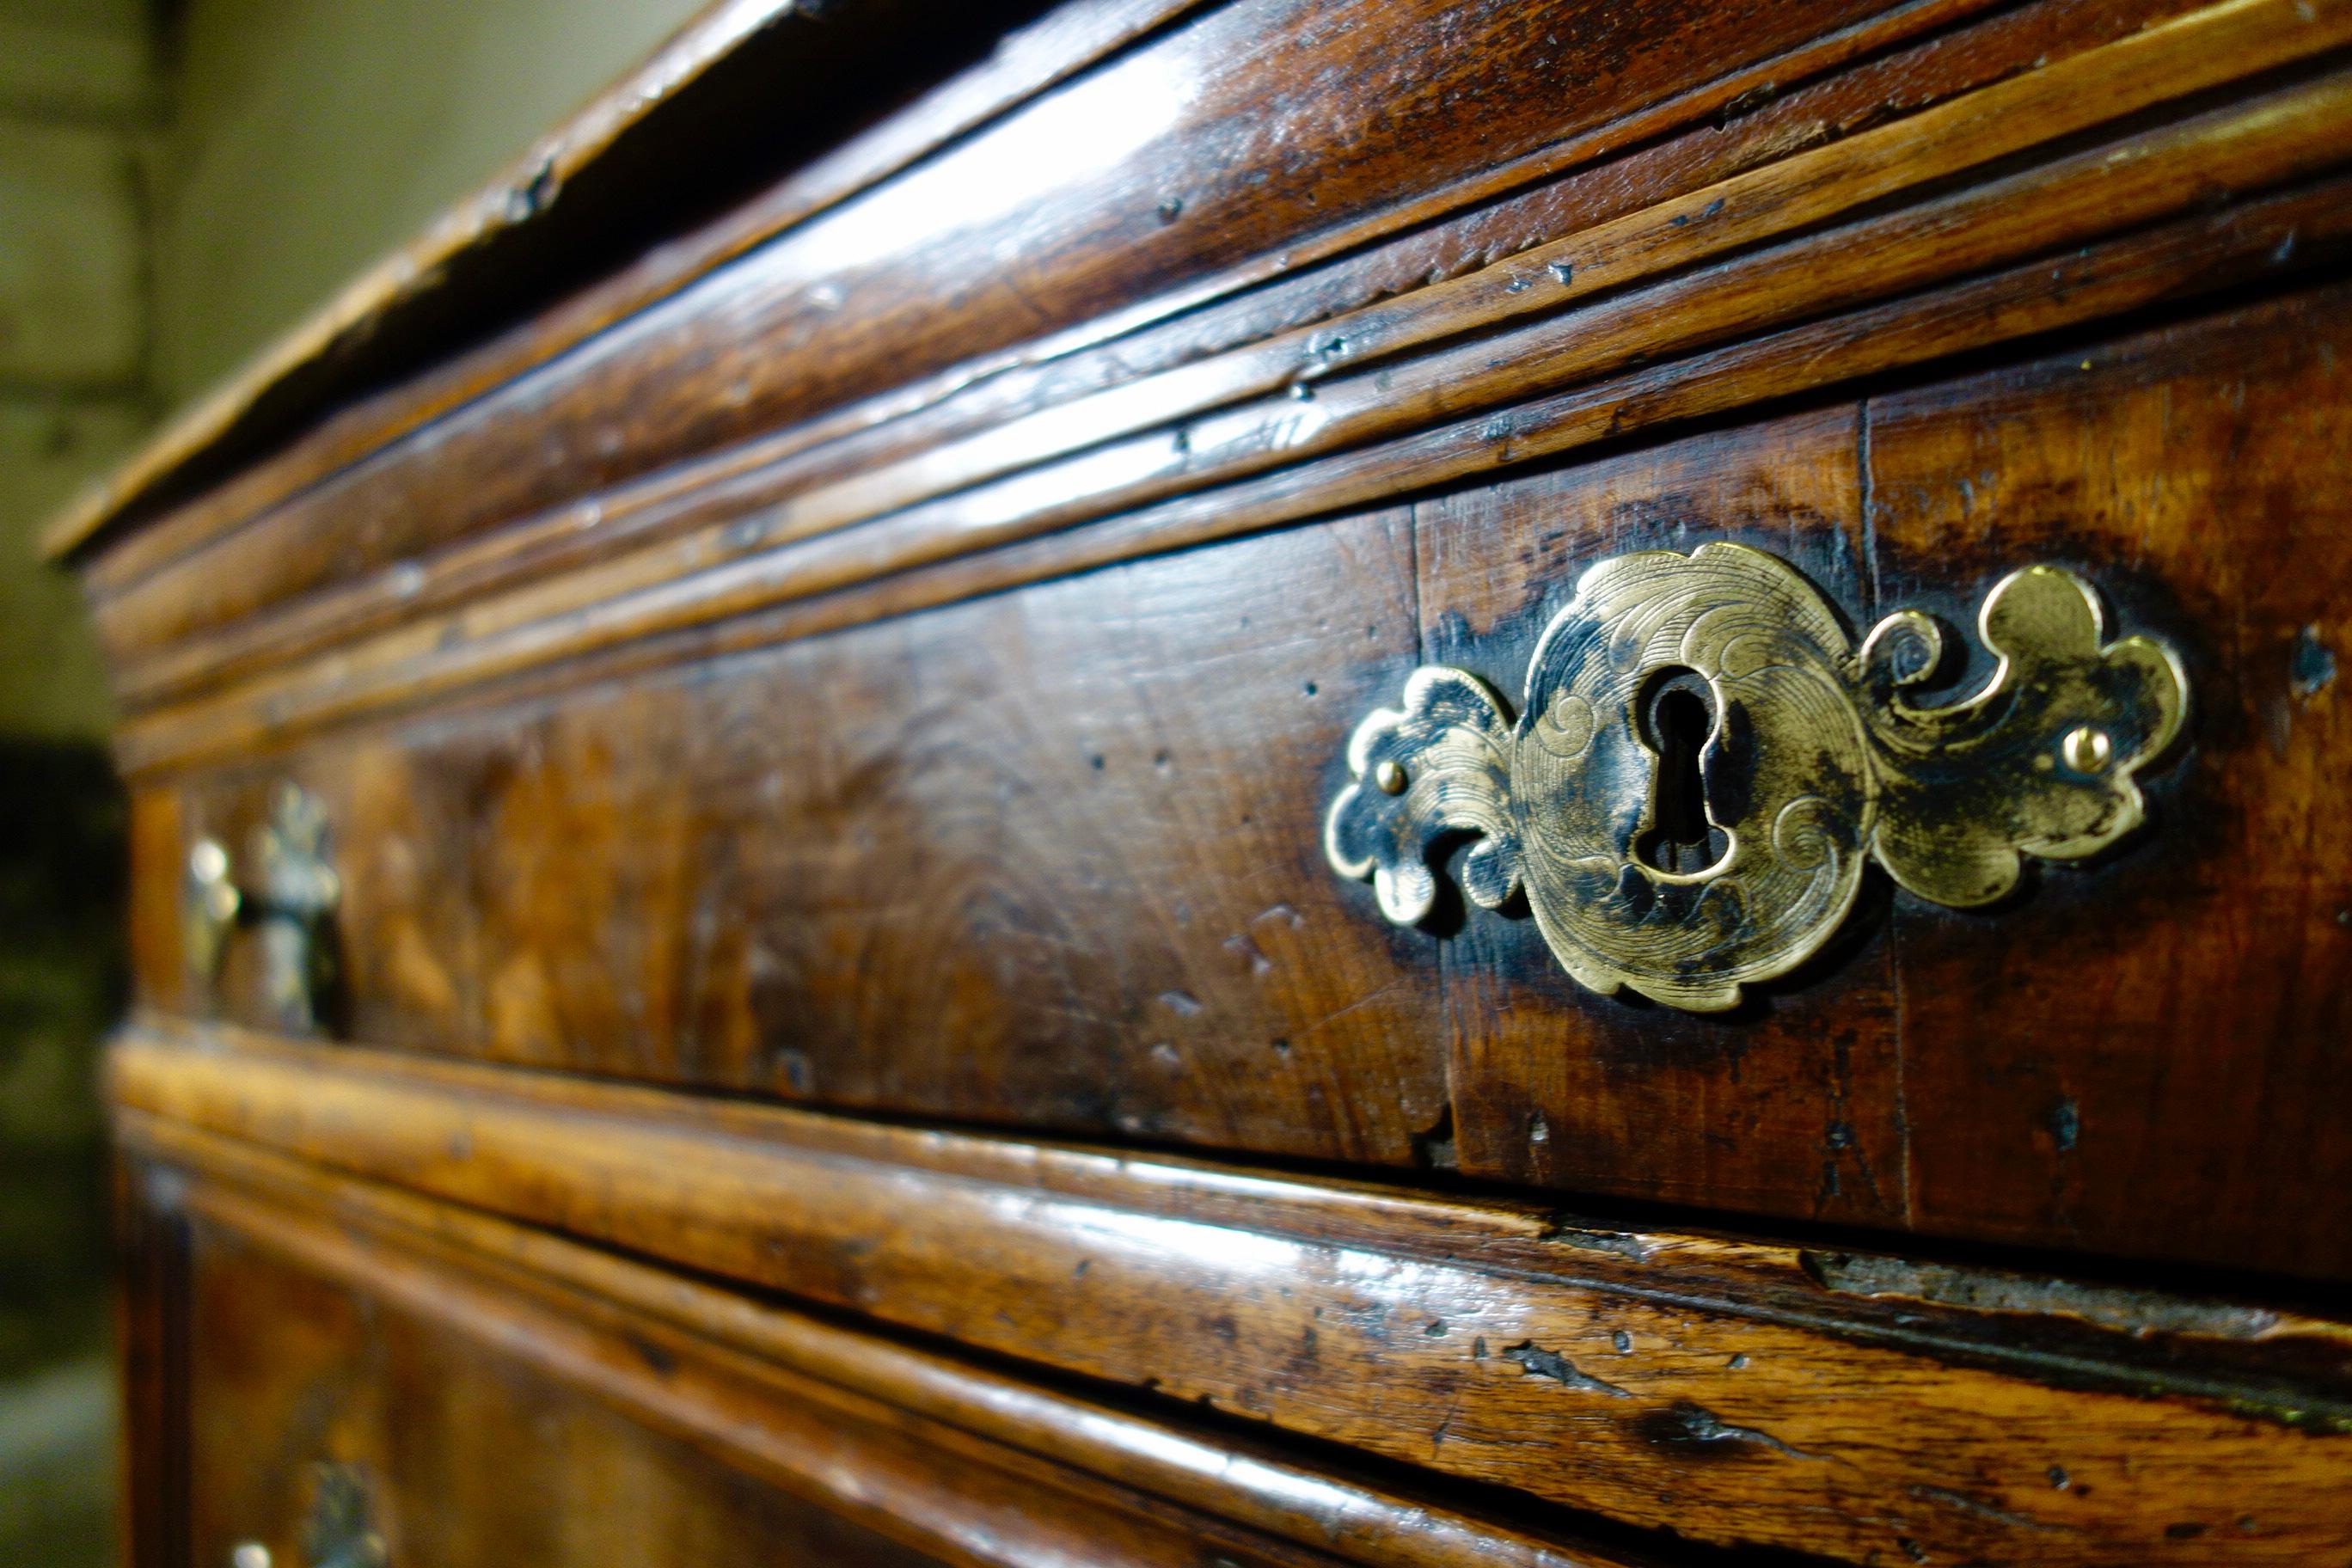 A Huge 17th Century North Italian Walnut Commode - Chest of Drawers - Dresser For Sale 2